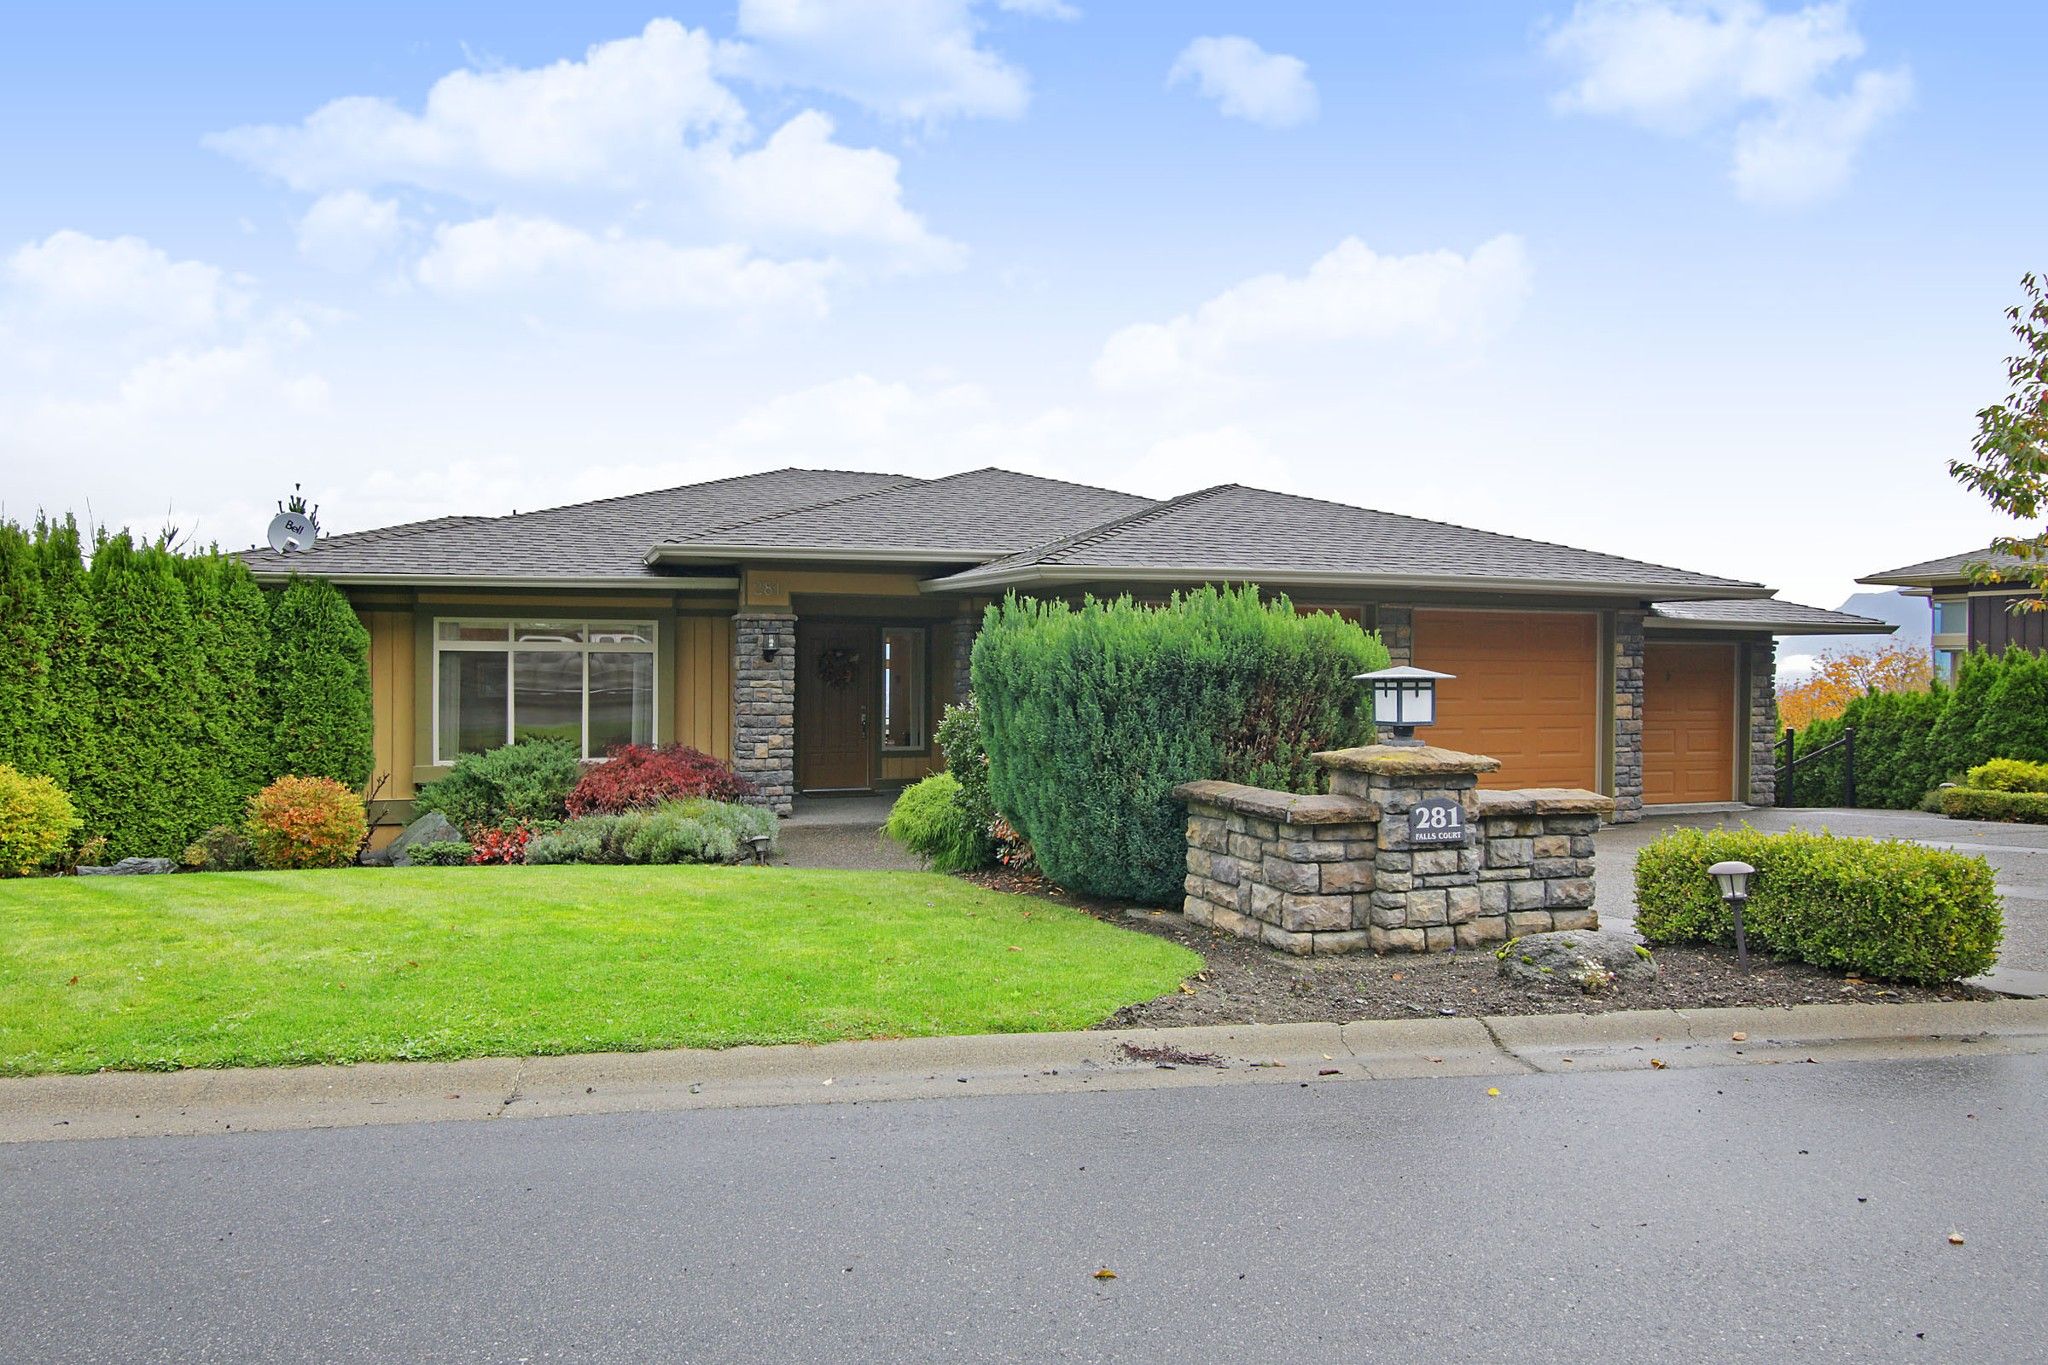 We have sold a property at 281 51075 FALLS CRT in Chilliwack